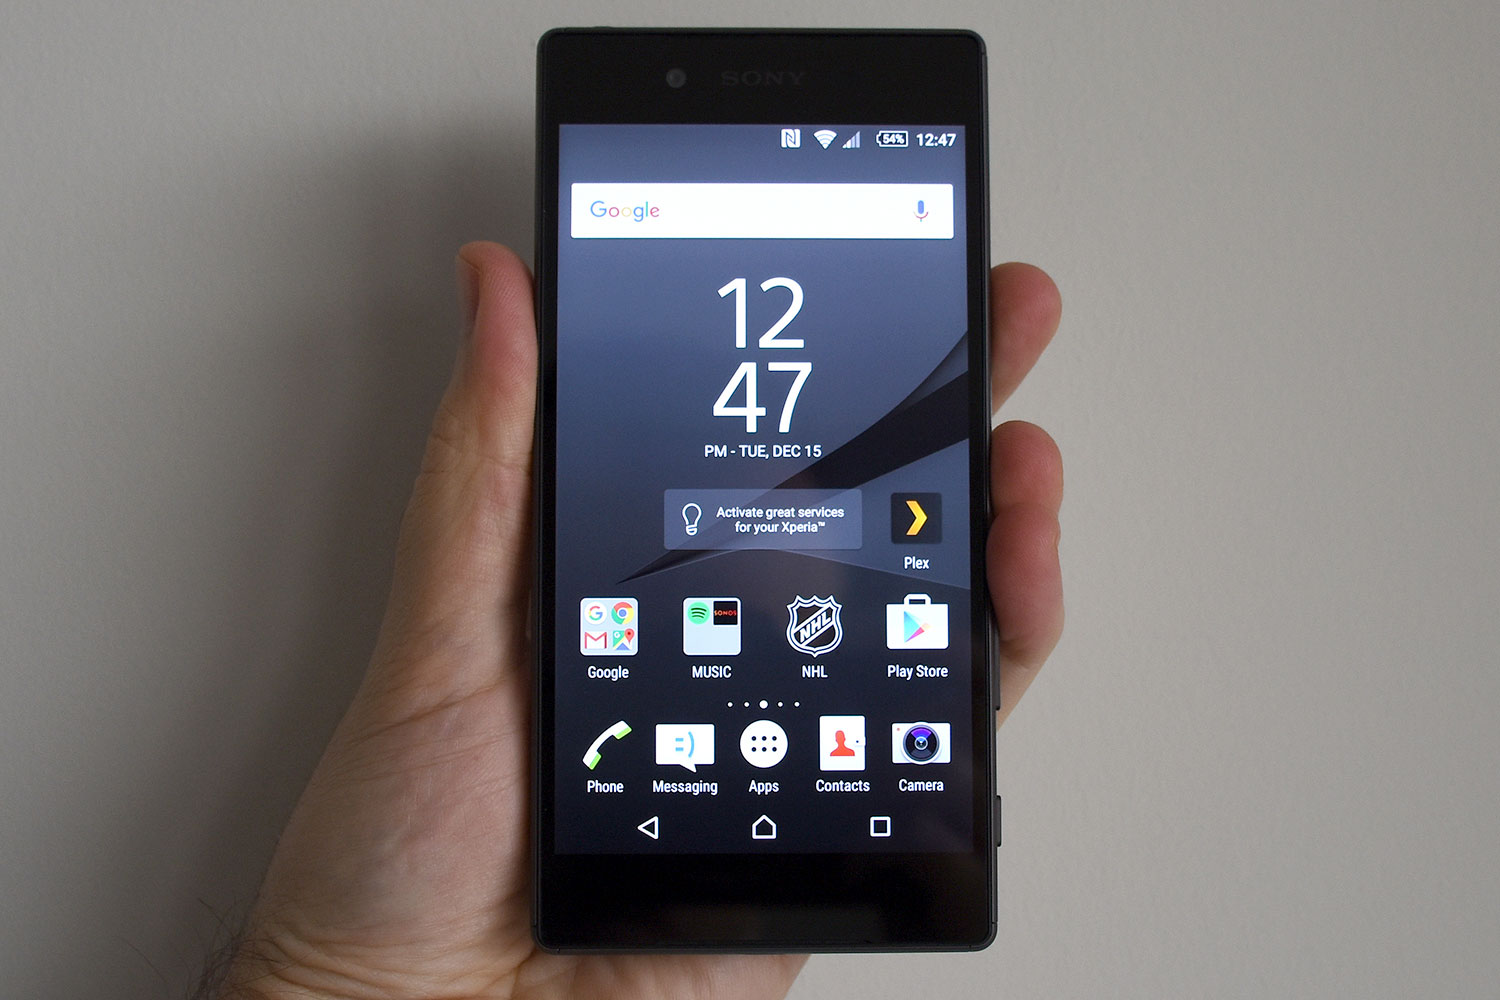 Sony Xperia Z5 Full Review, Specs, Price, and More | Digital Trends